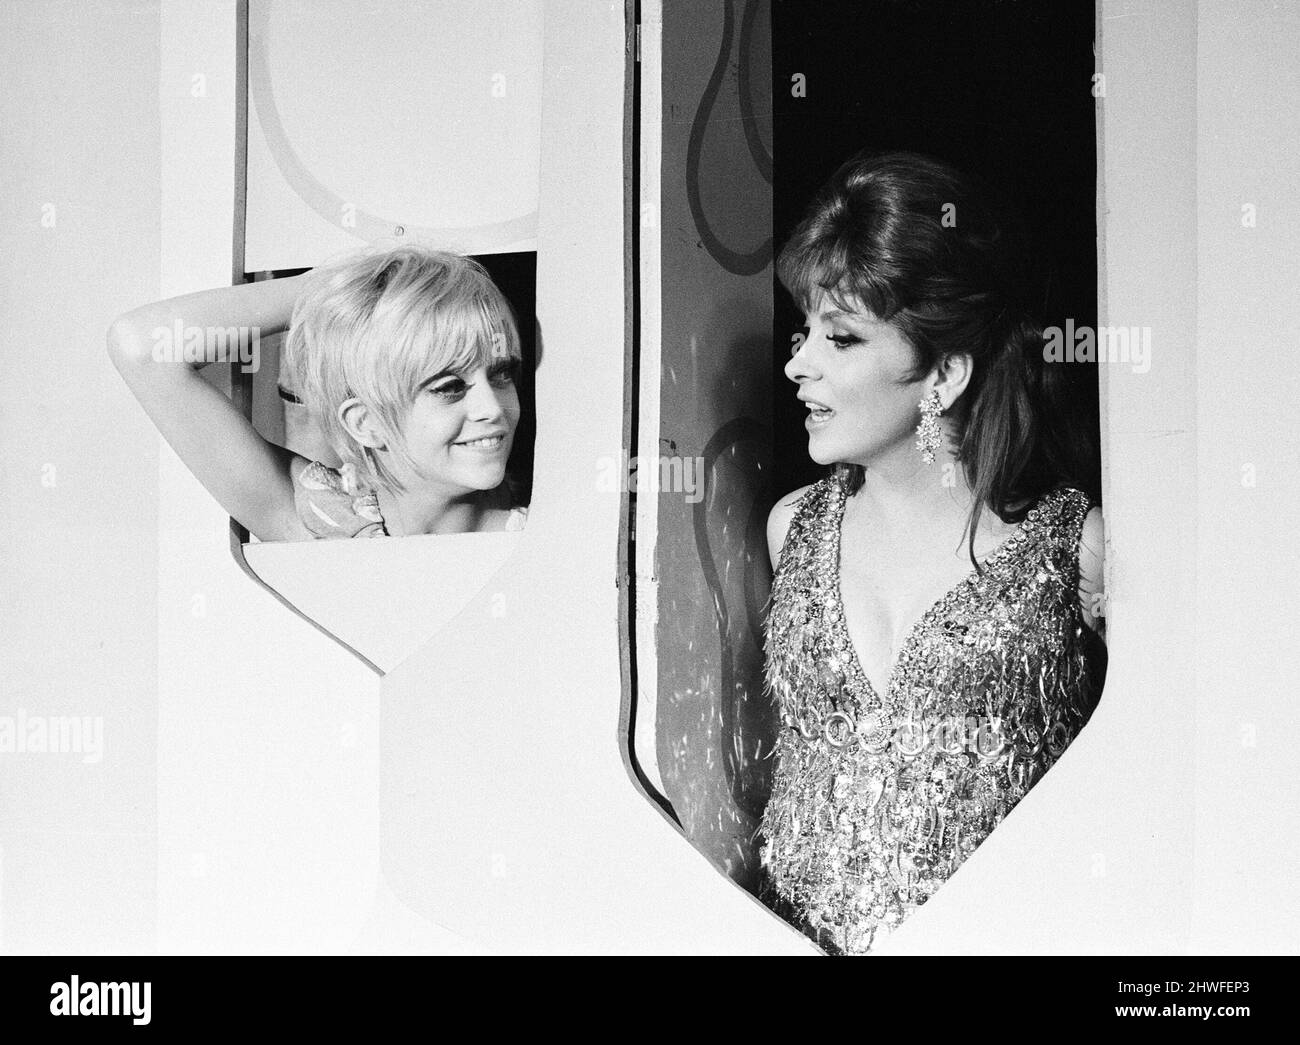 Rowan & Martin's Laugh-In, an American sketch comedy television program on the NBC television network, behind the scenes filming for series 2 episode 22, (aired Monday 3rd March 1969), in studio, Wednesday 15th January 1969. Our picture shows ... Goldie Hawn and Gina Lollobrigida, Joke Wall. Stock Photo